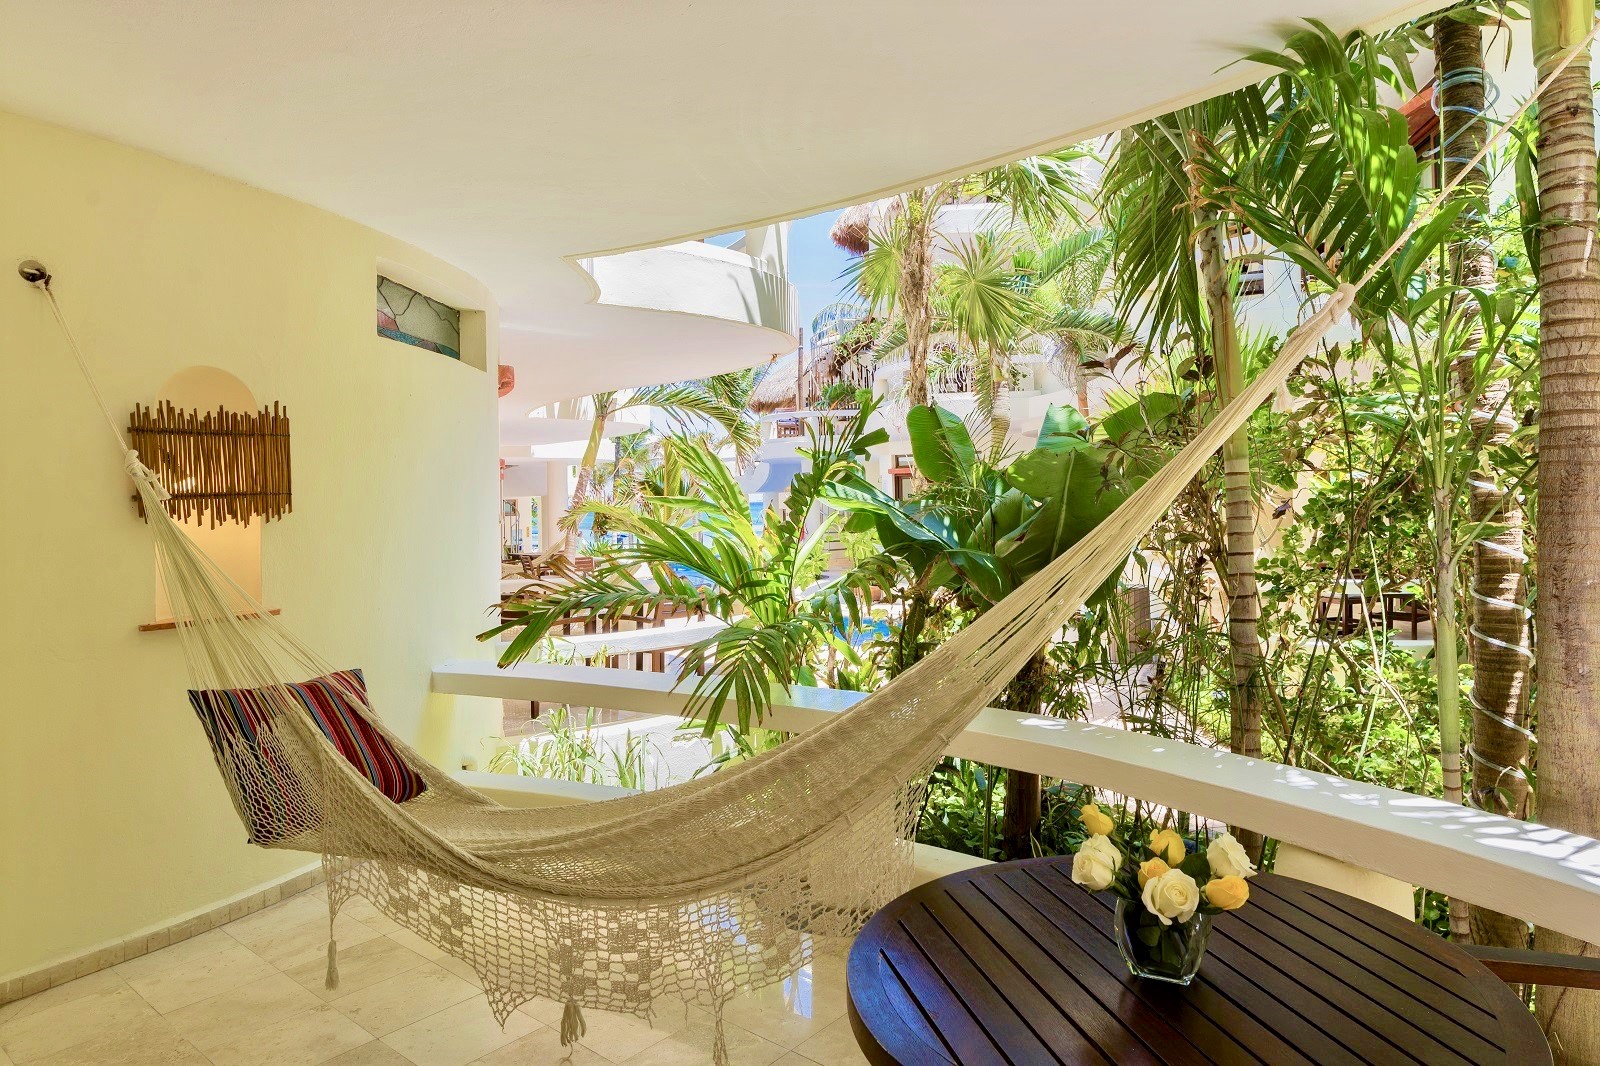 Relax on Your hammock.